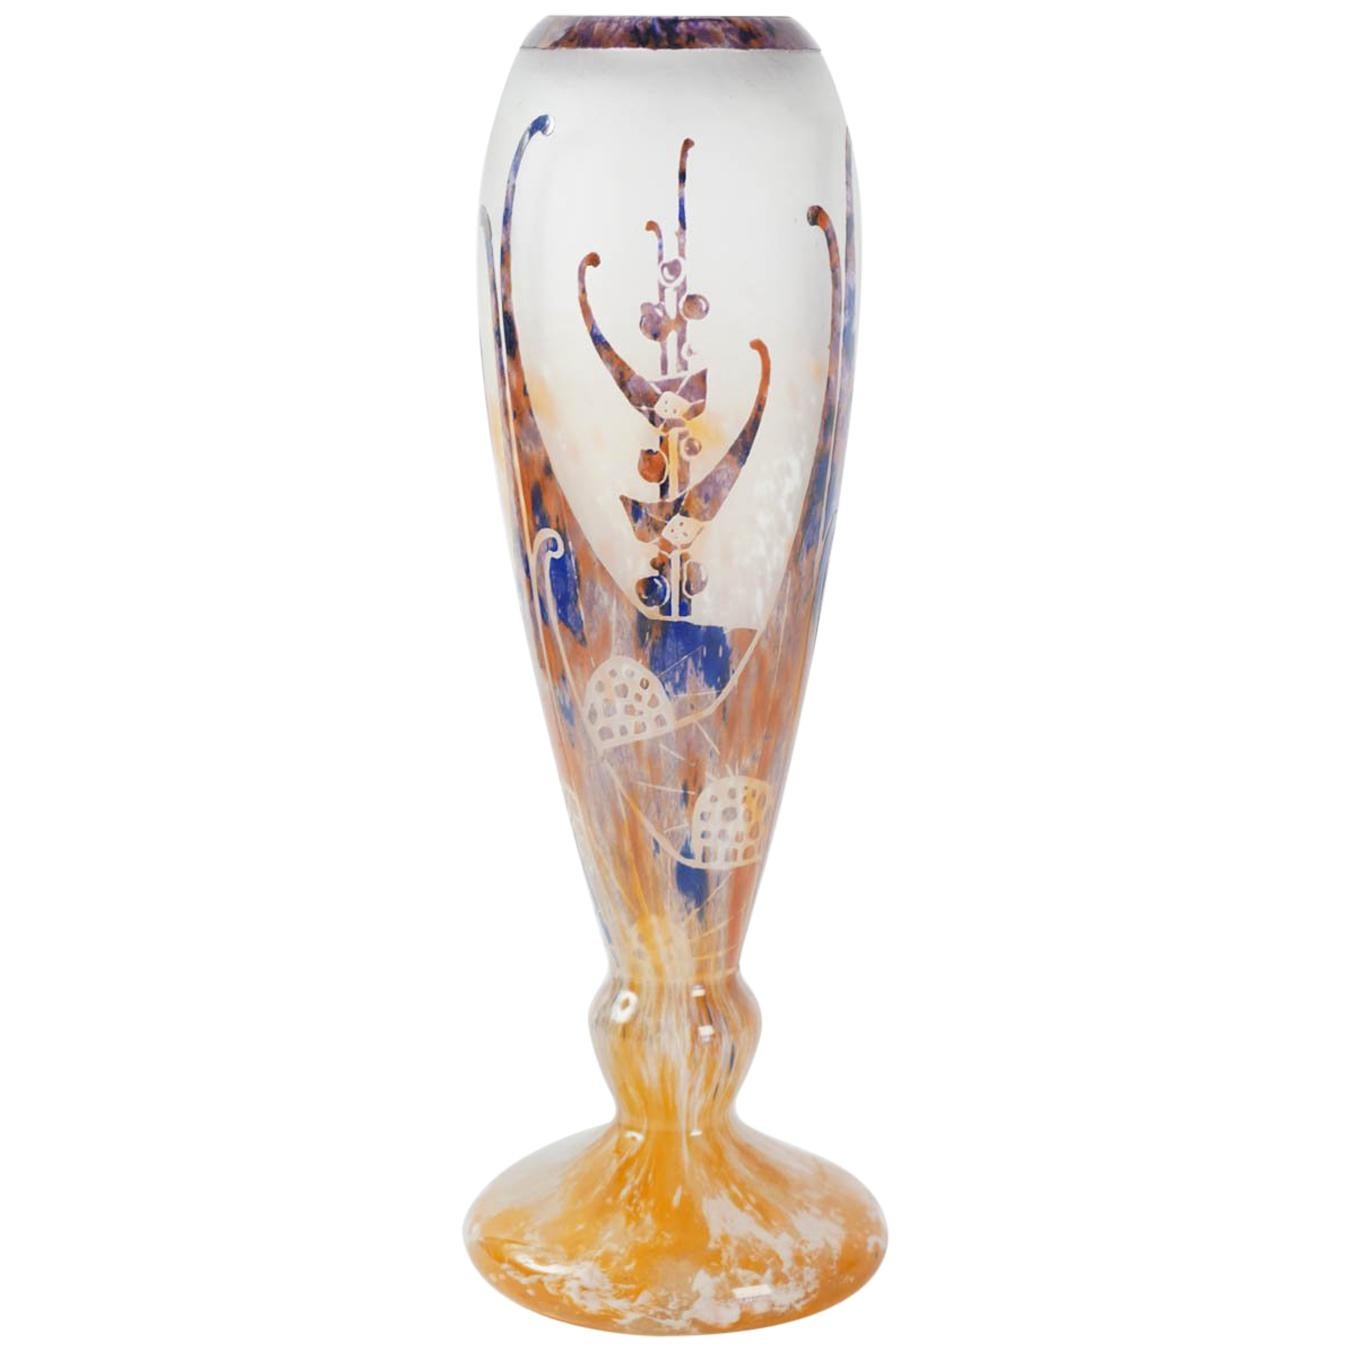 One of a Kind Glass Vase by Le Verre Francais, Signed on Base, France, 1930s